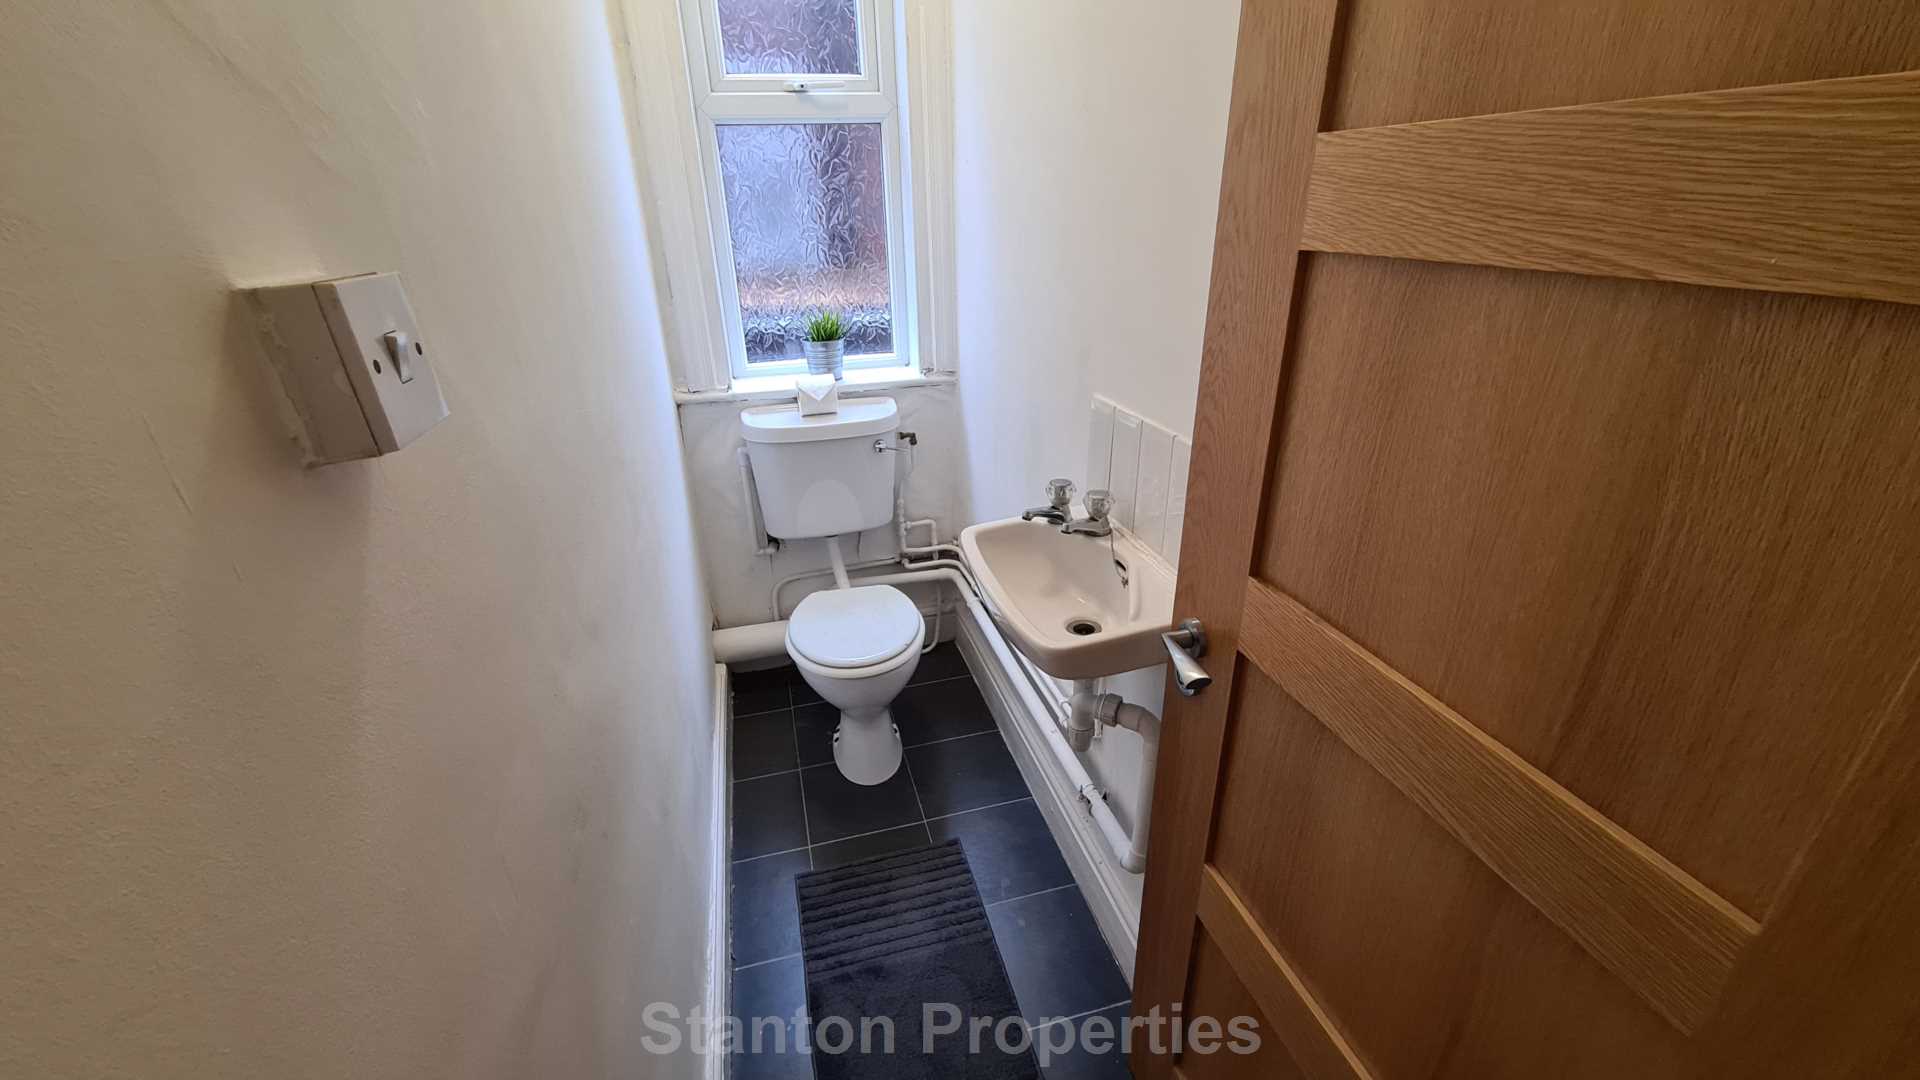 £145 pppw, See Video Tour, Wellington Road, Fallowfield, Image 28